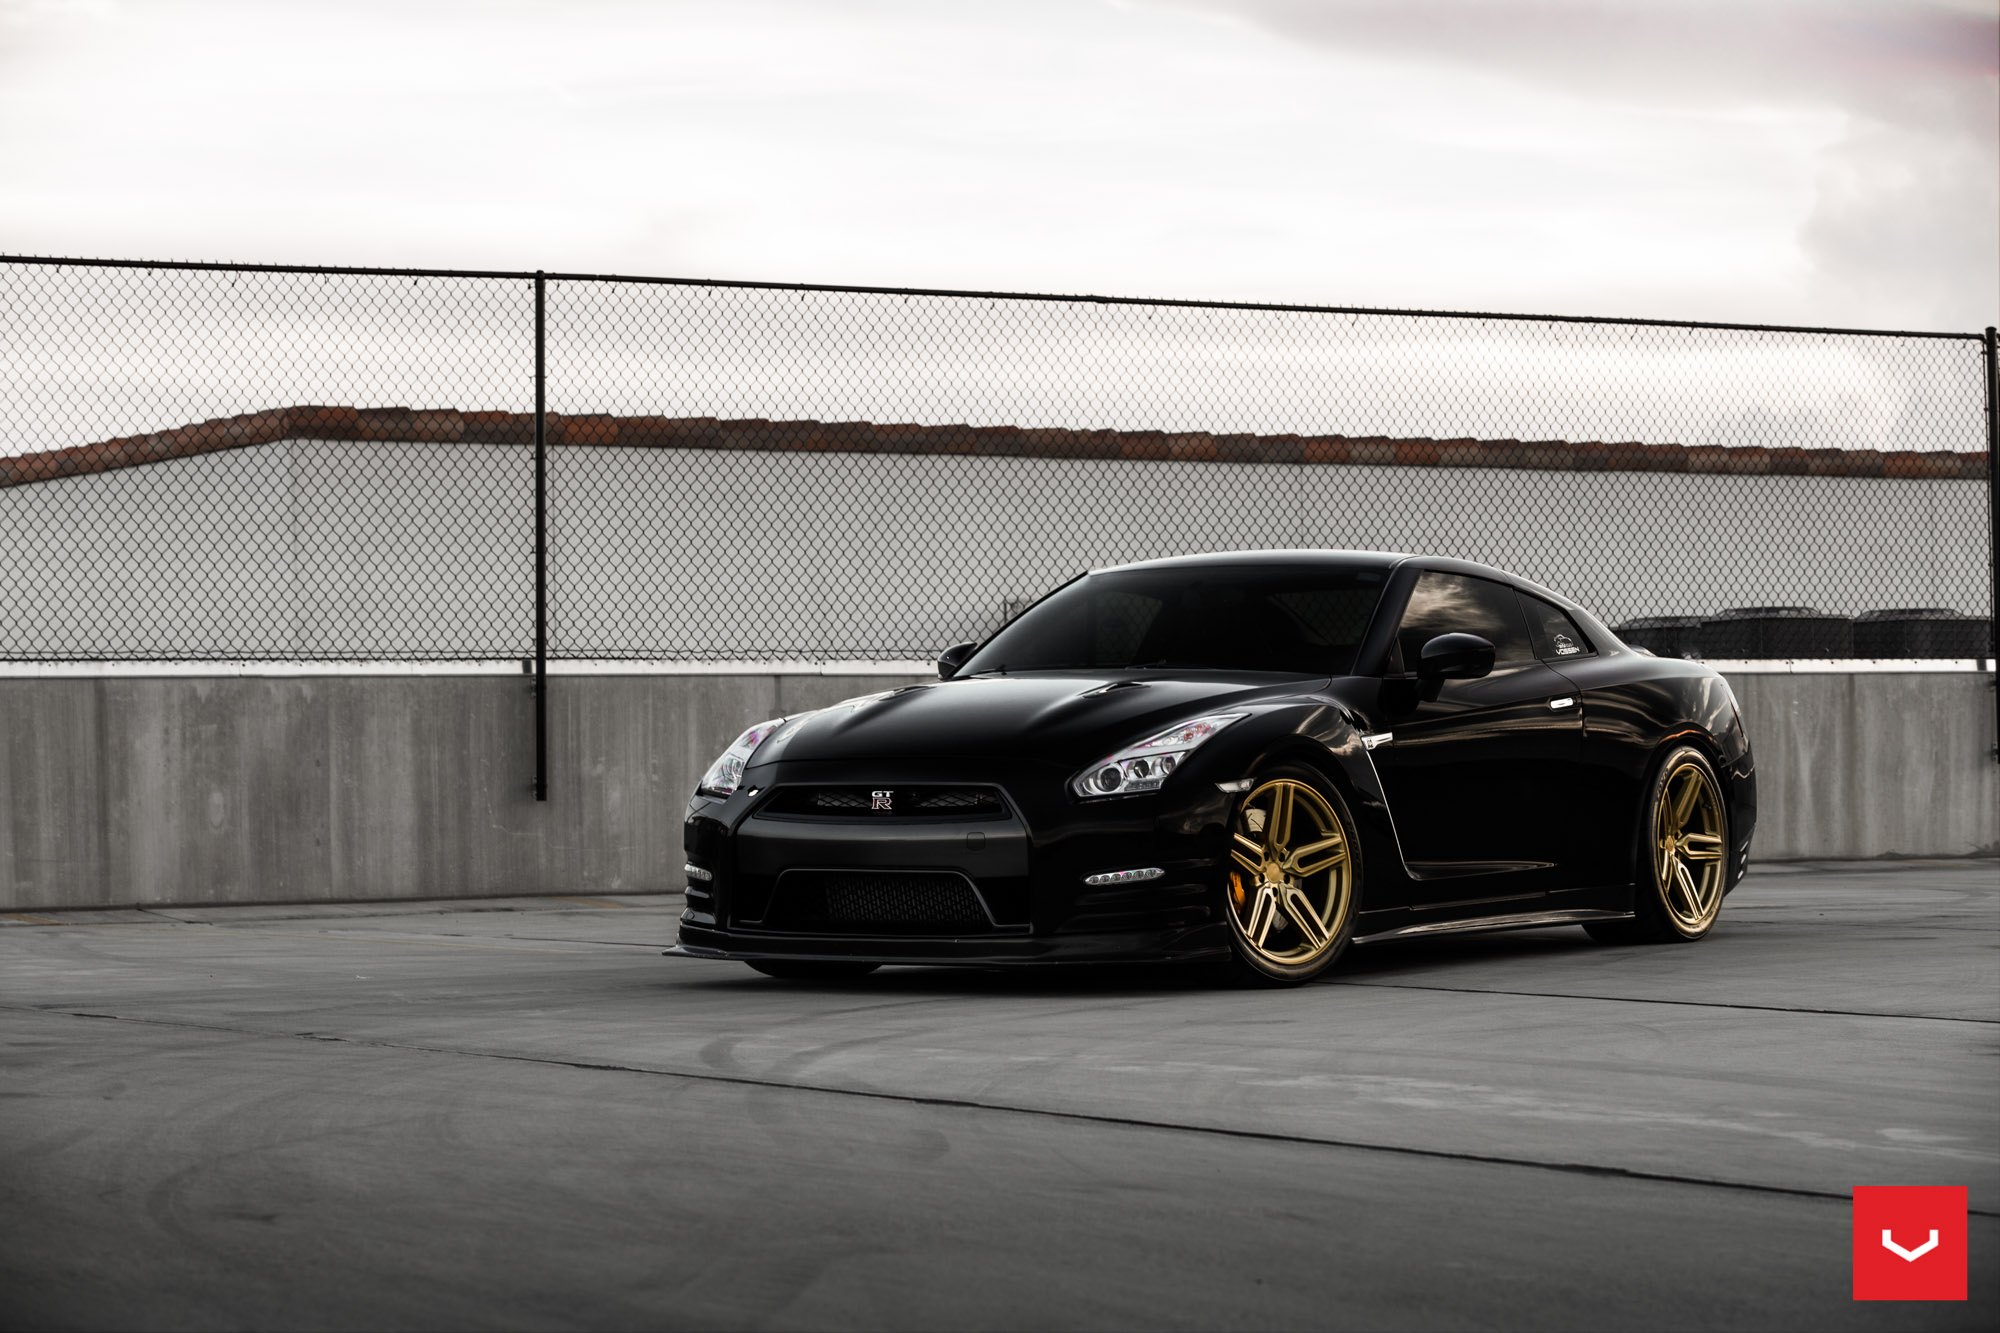 Black Nissan GT-R with Custom Vented Hood - Photo by Vossen